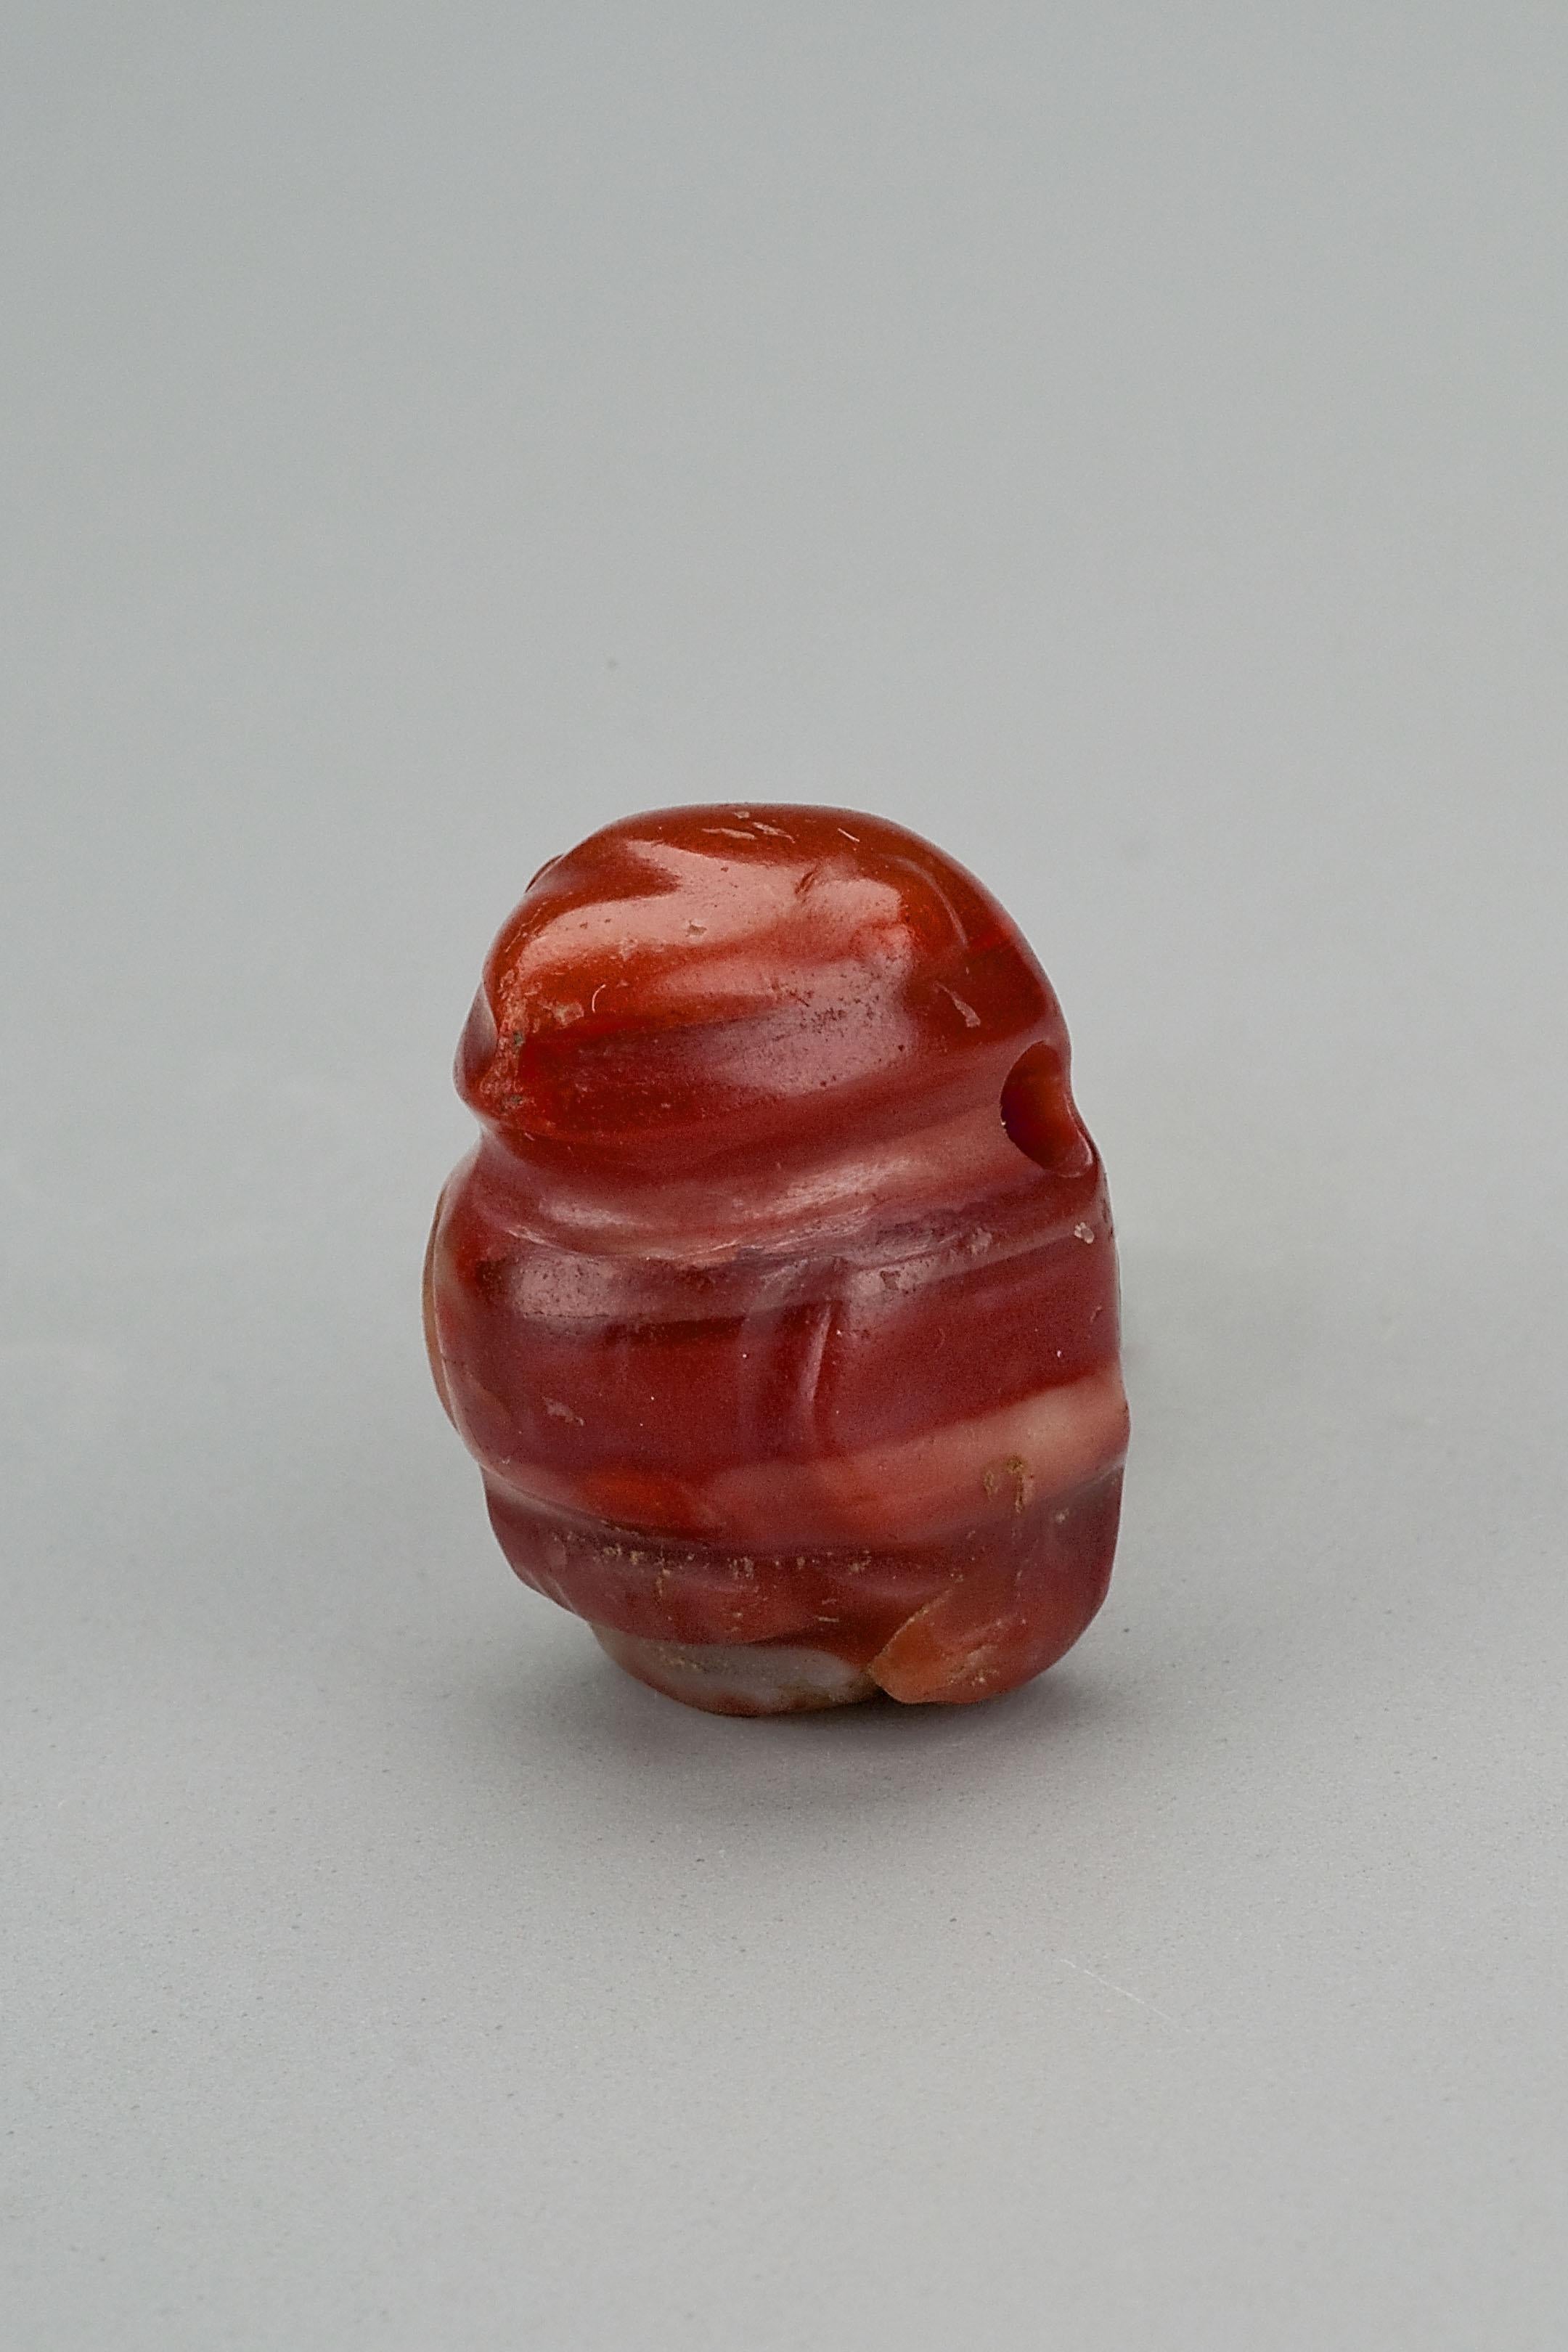 Twenty-four round gold beads with twenty-four round carnelian beads and a pair of cylindrical carnelian tubes. There are three bird pendants, two of red jasper and one of orange carnelian. The stone pieces are said to be from the Tairona people of